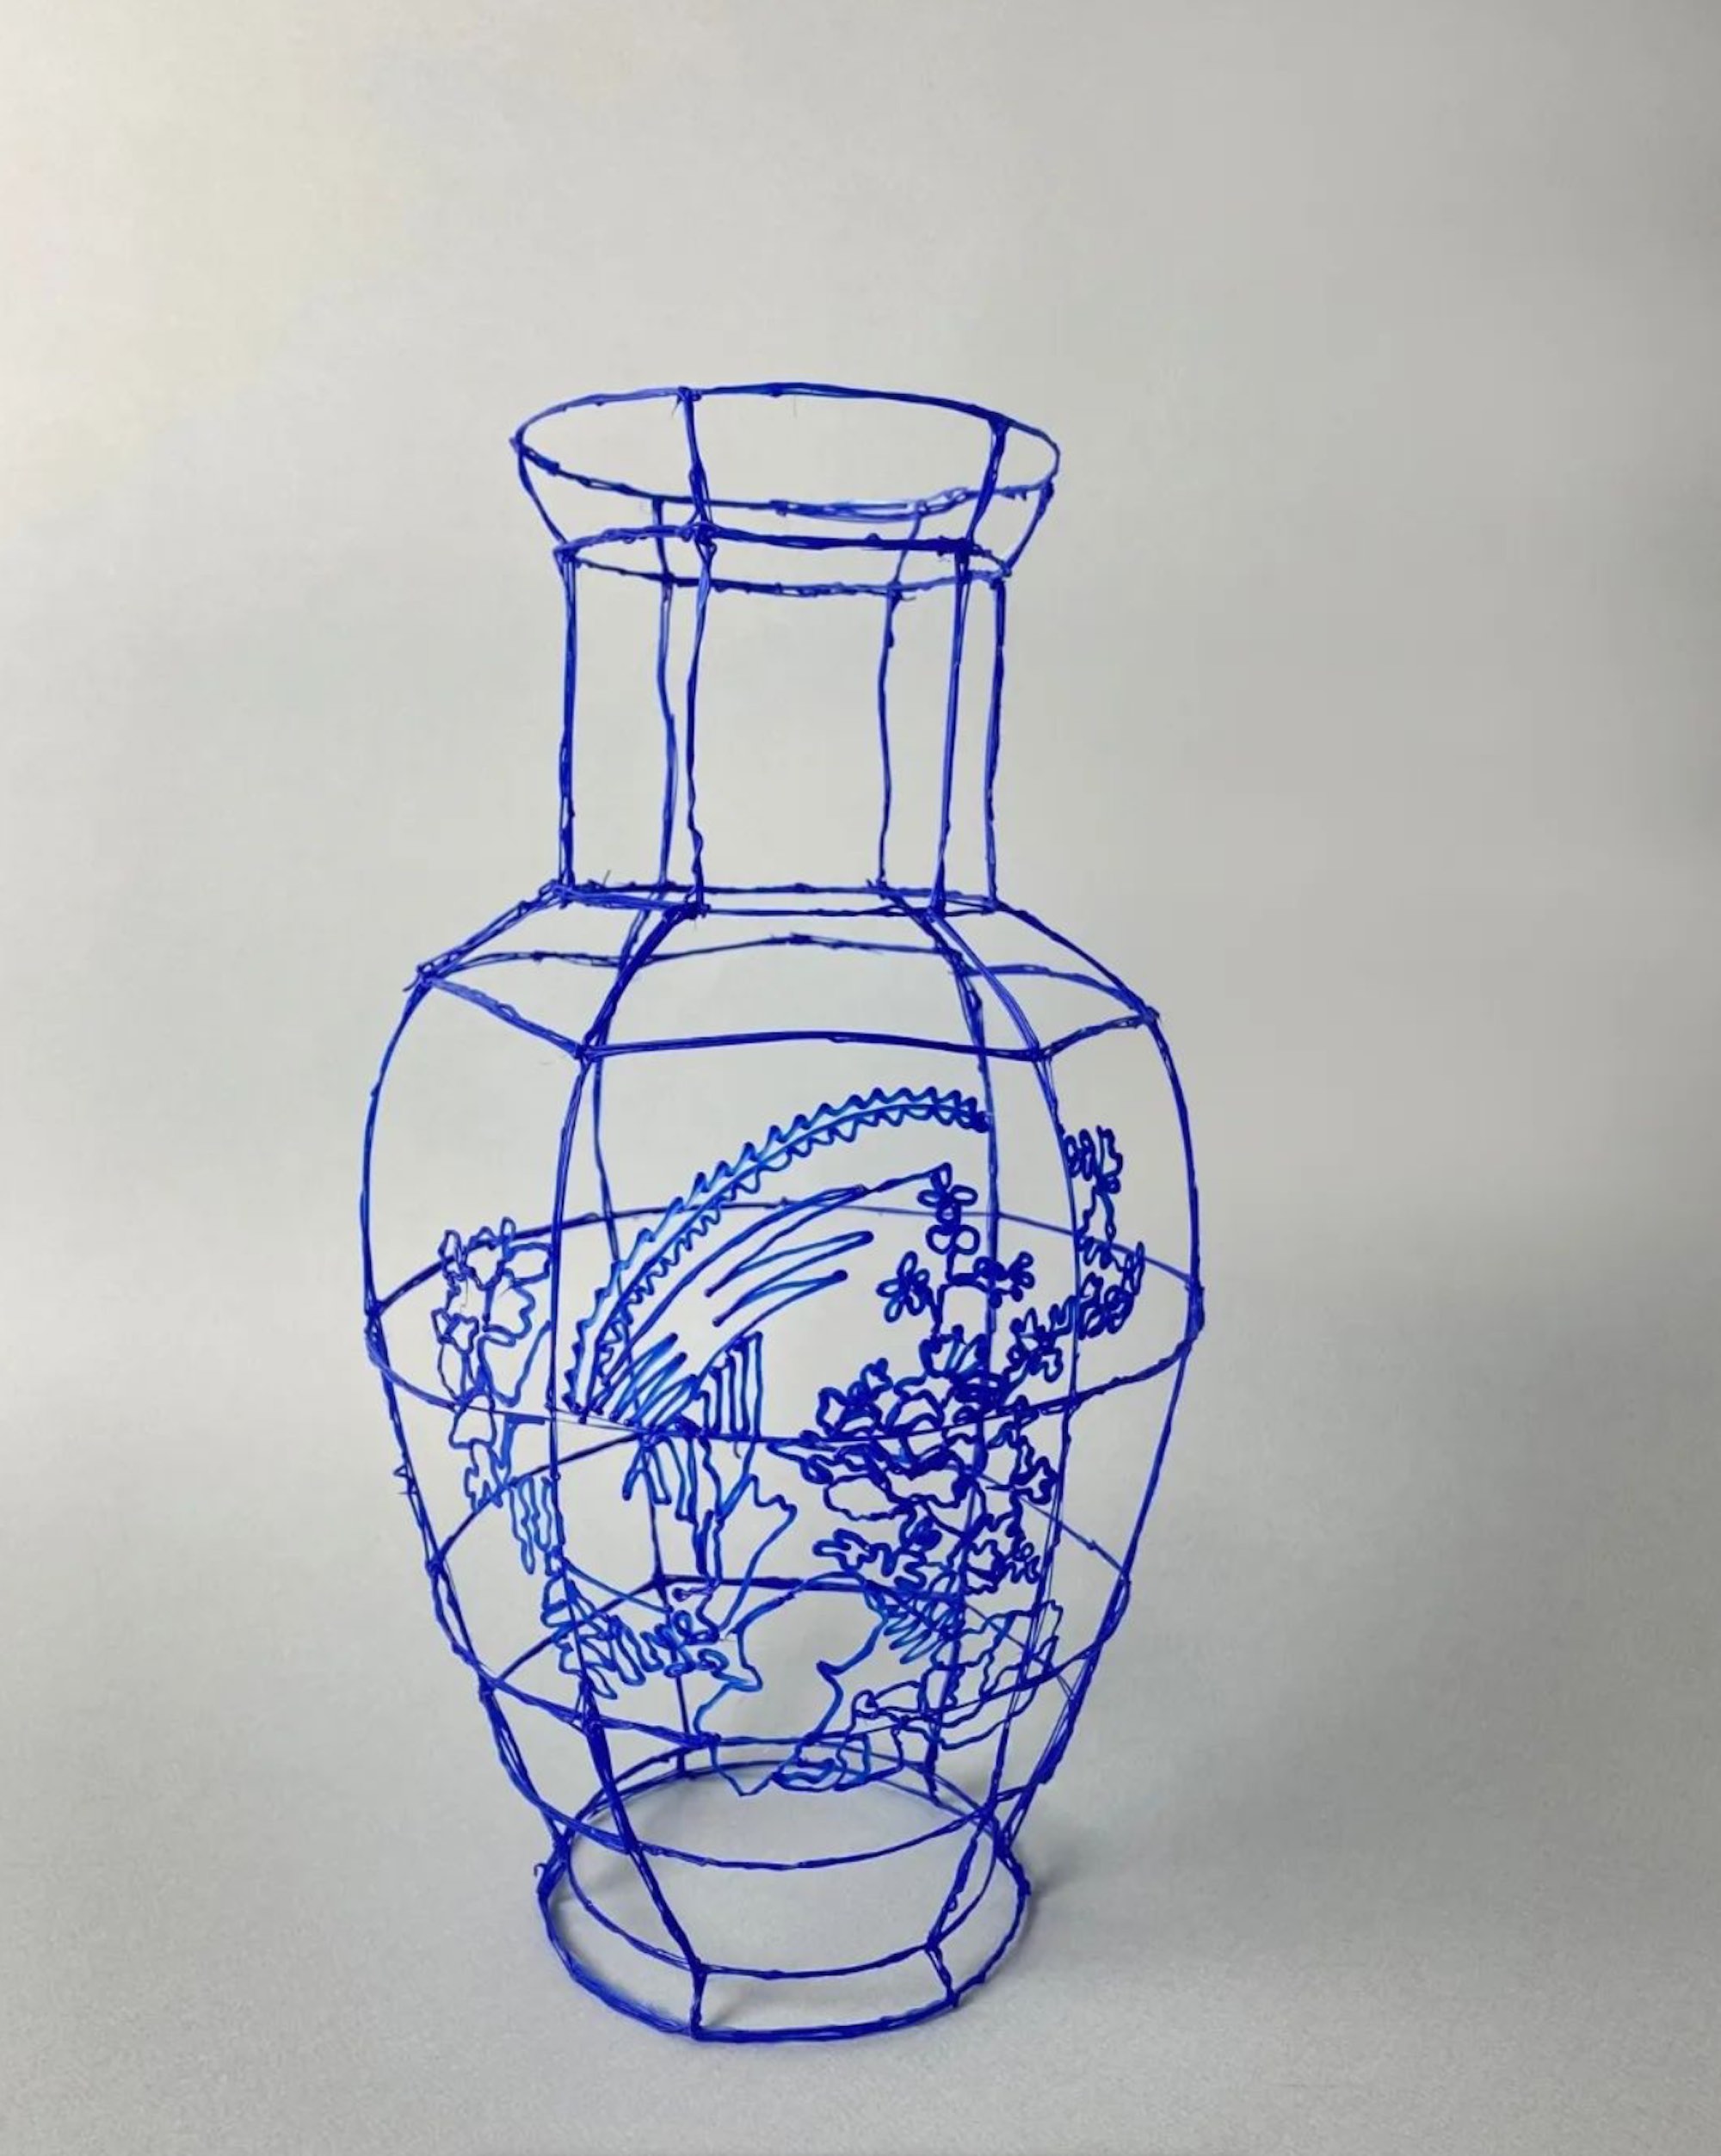 VASE WITH FLOWERS - BLUE